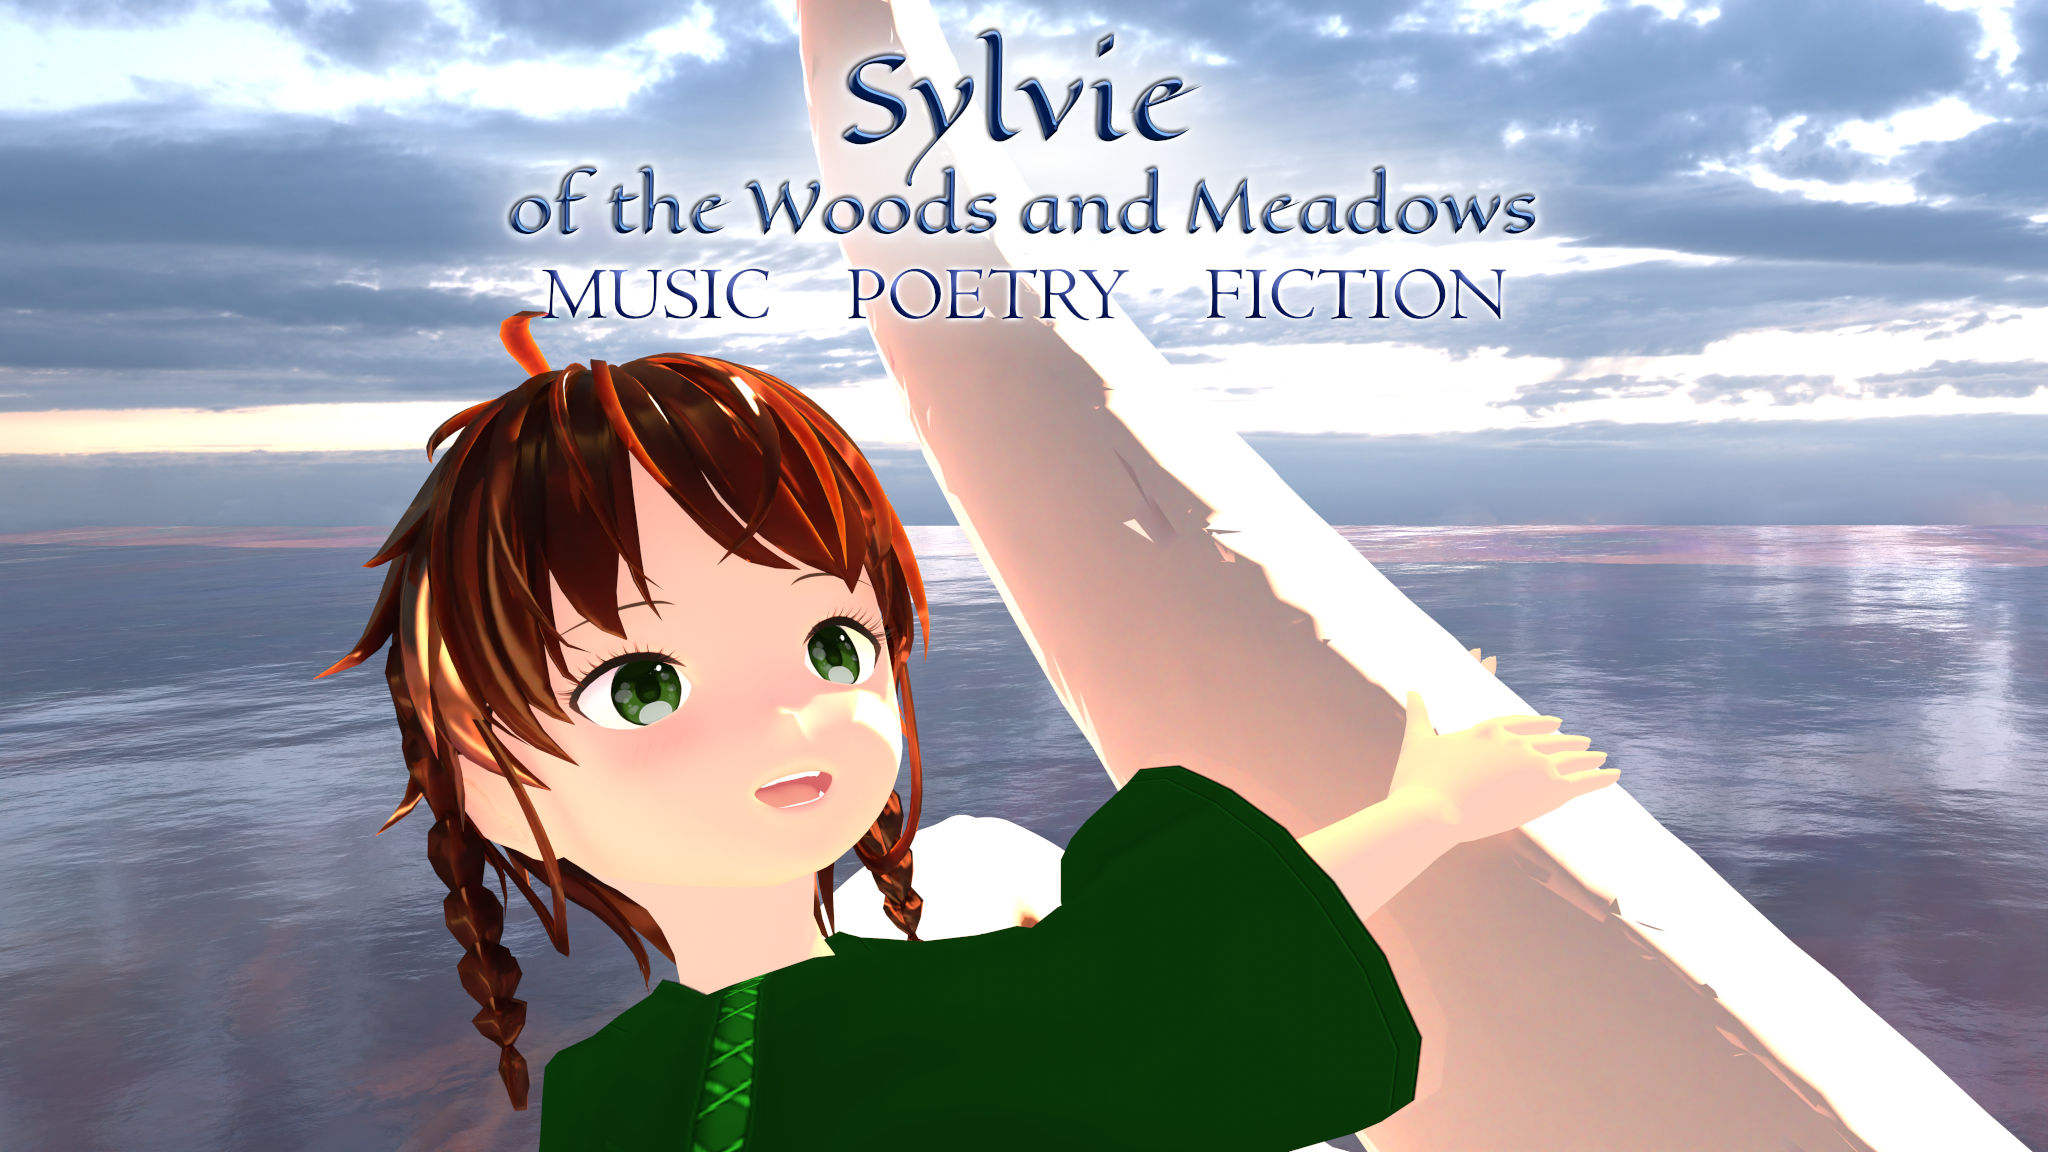 Sylvie of the Woods and Meadows: Music, Poems, Fiction